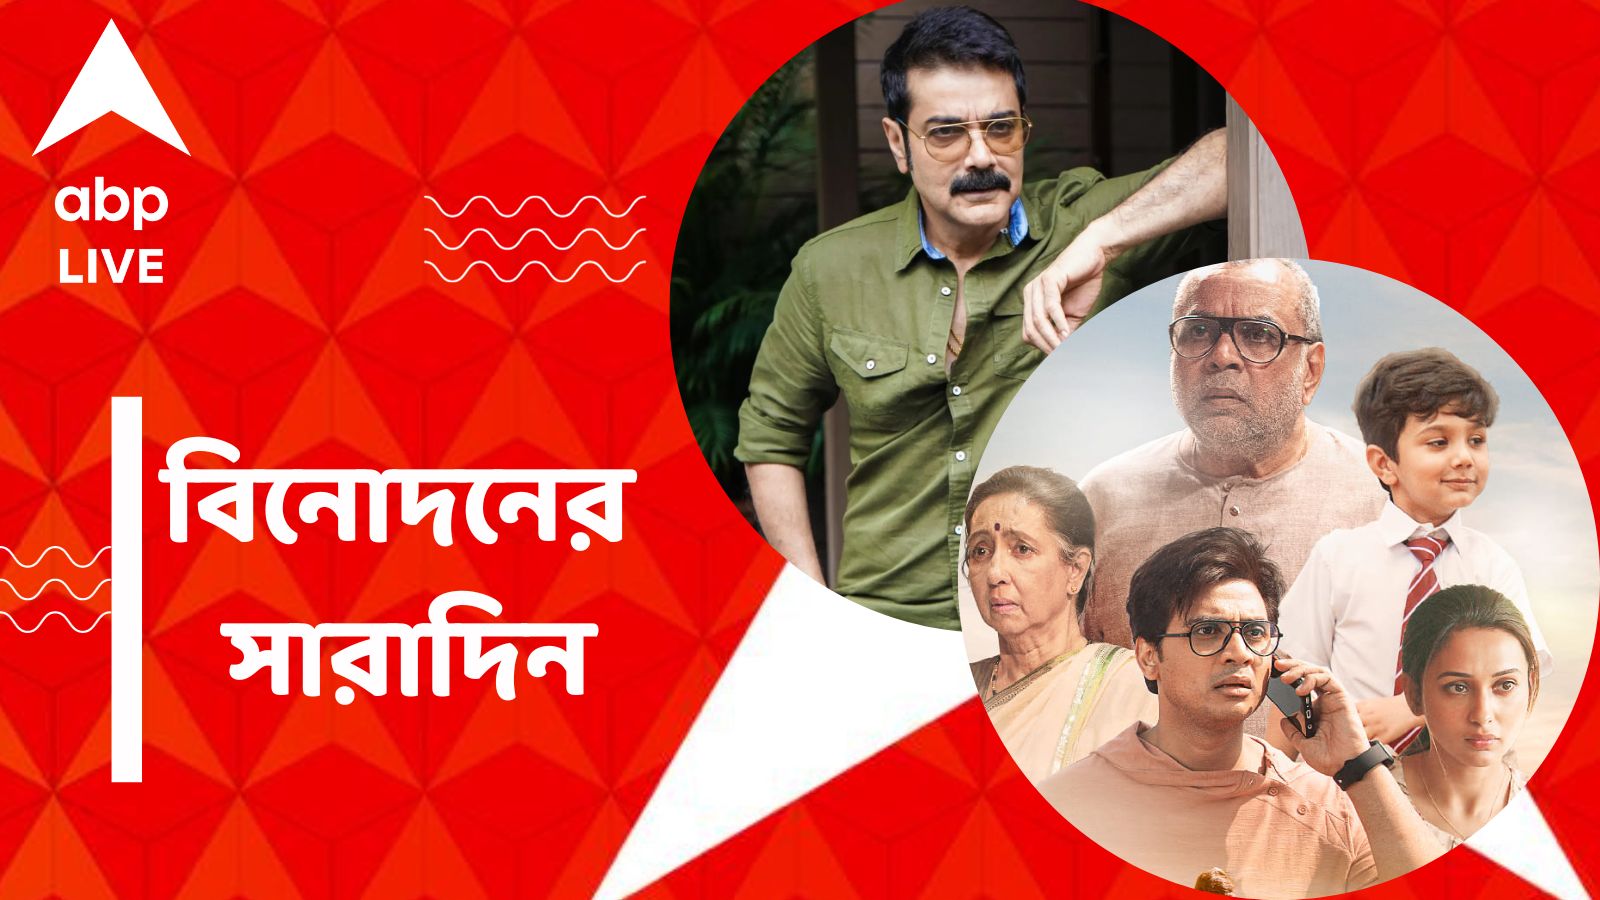 Top Entertainment News Today: Mamata Banerjee Praised Prosenjit For His Film Get To Know Top Entertainment News For The Day Which You Cant Miss Know In Details